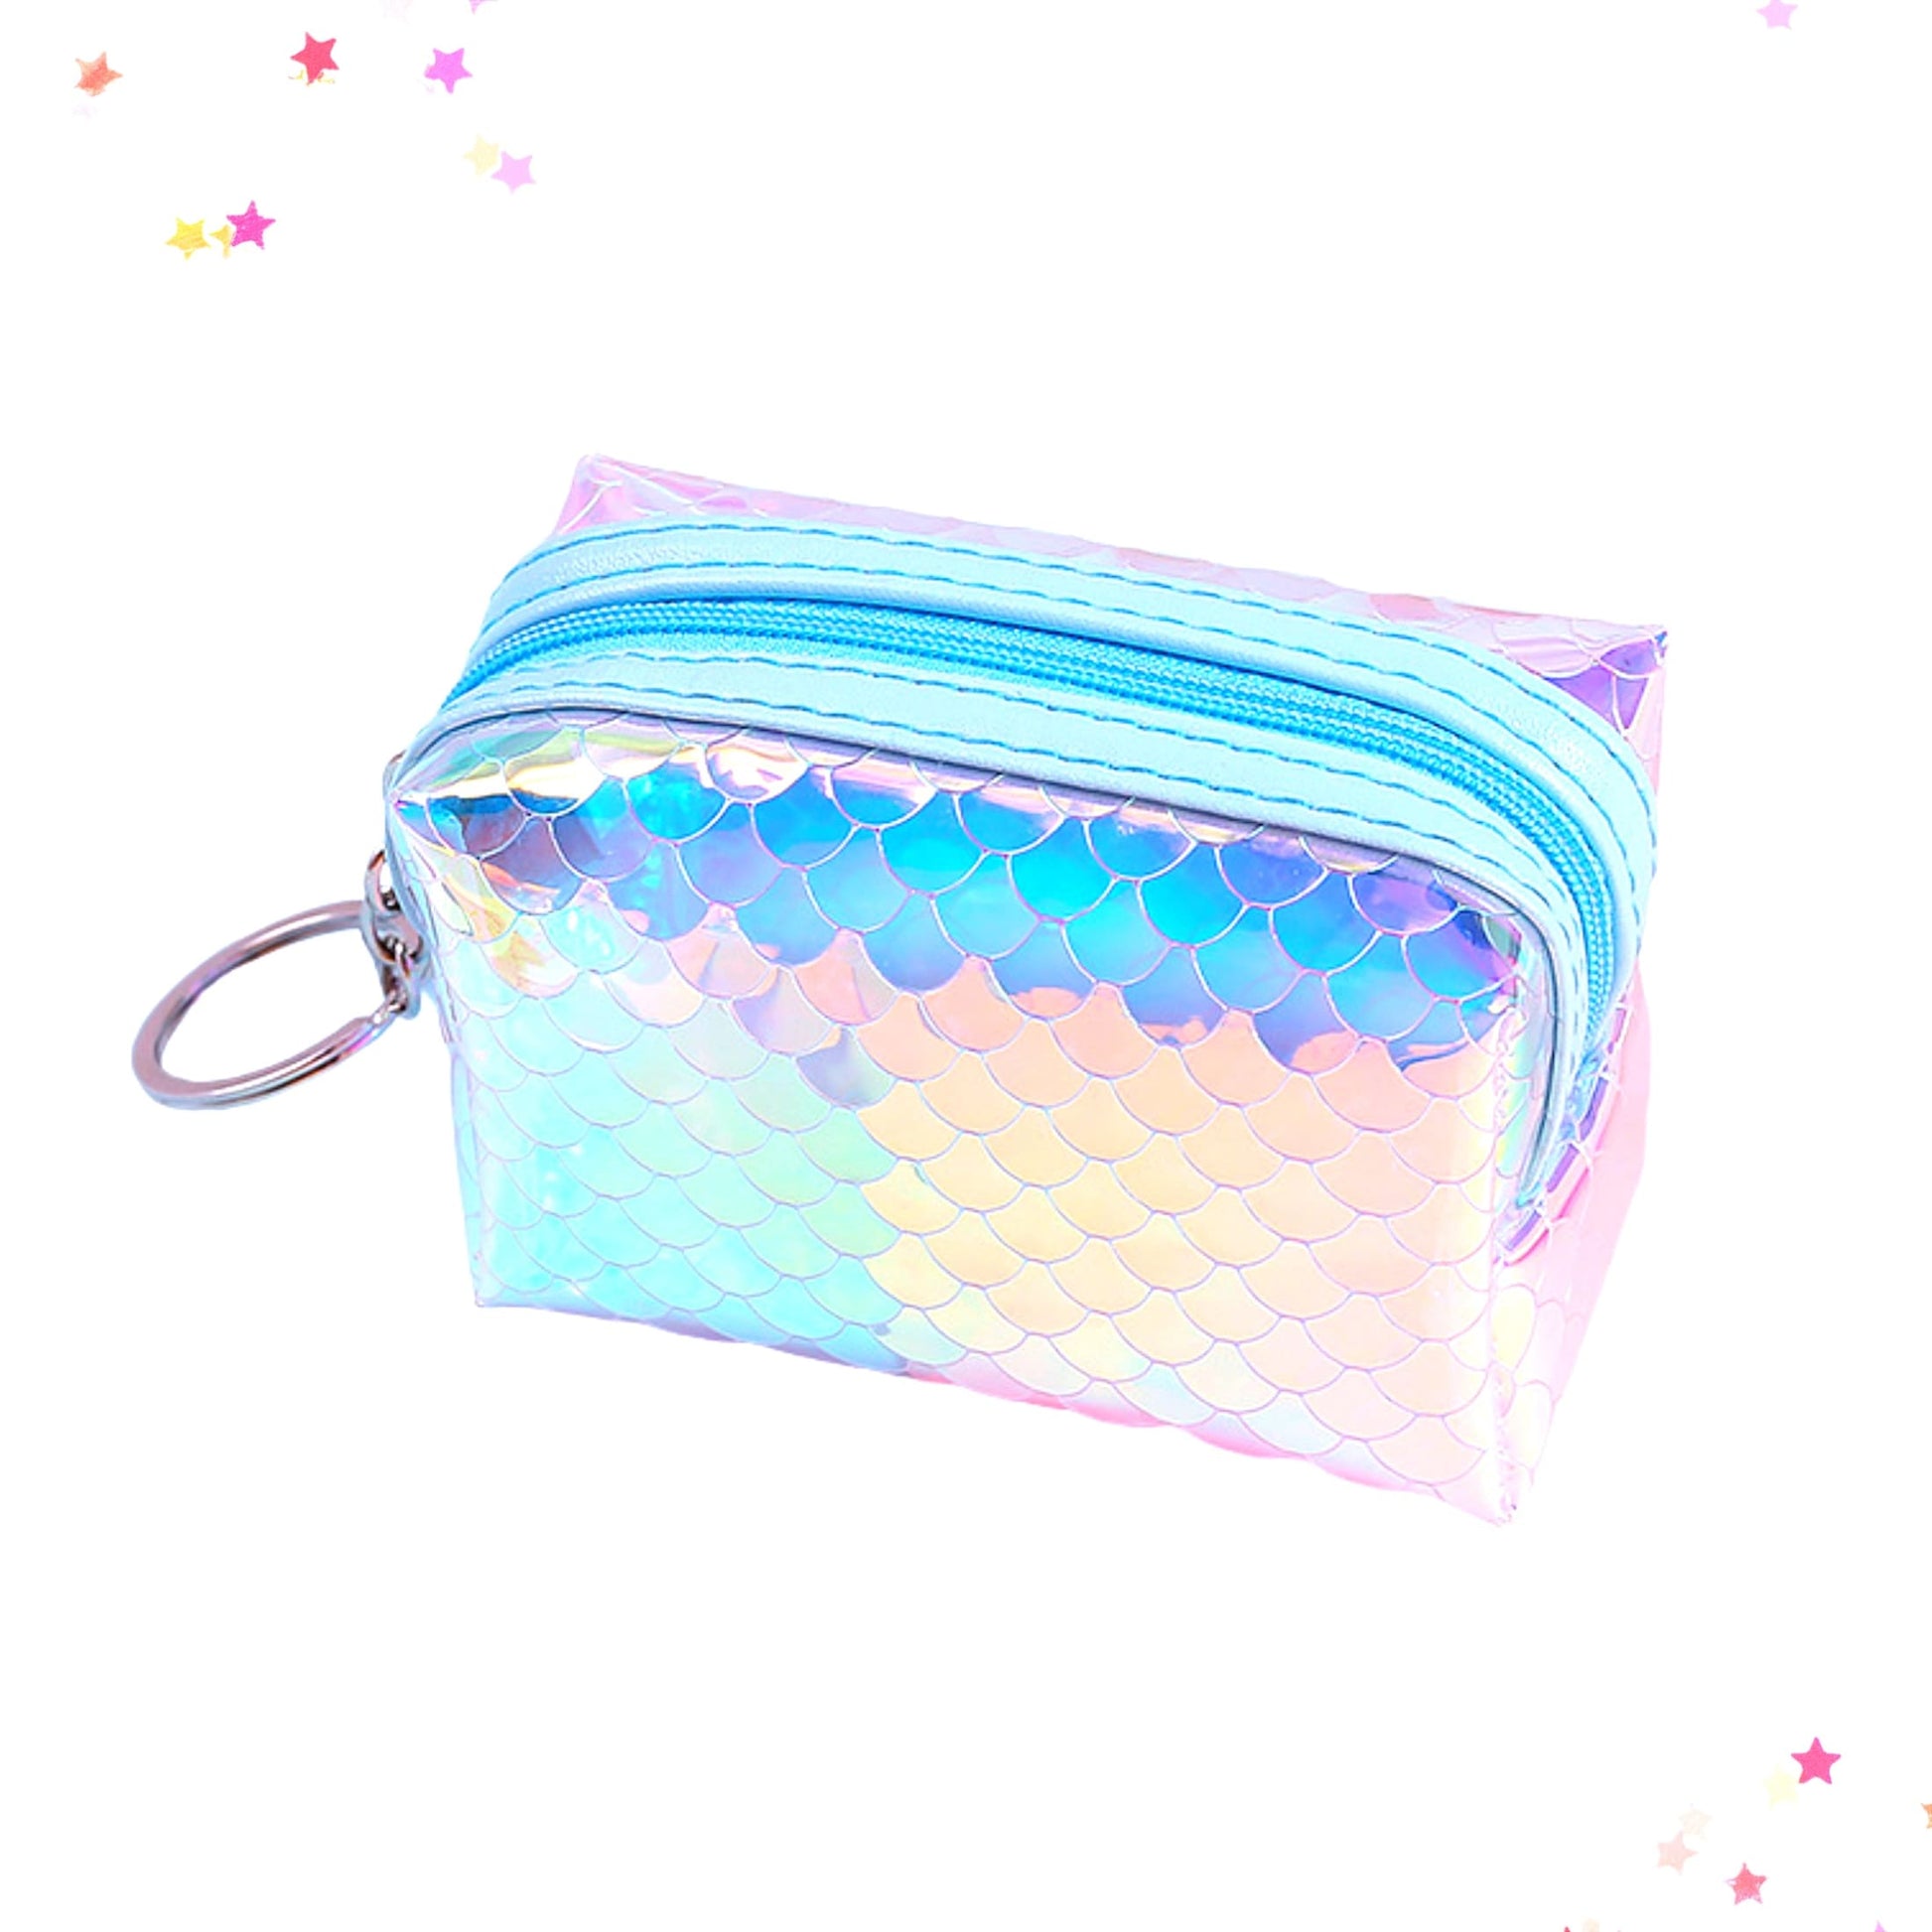 Iridescent Mermaid Scale Zipper Bag from Confetti Kitty, Only 6.99